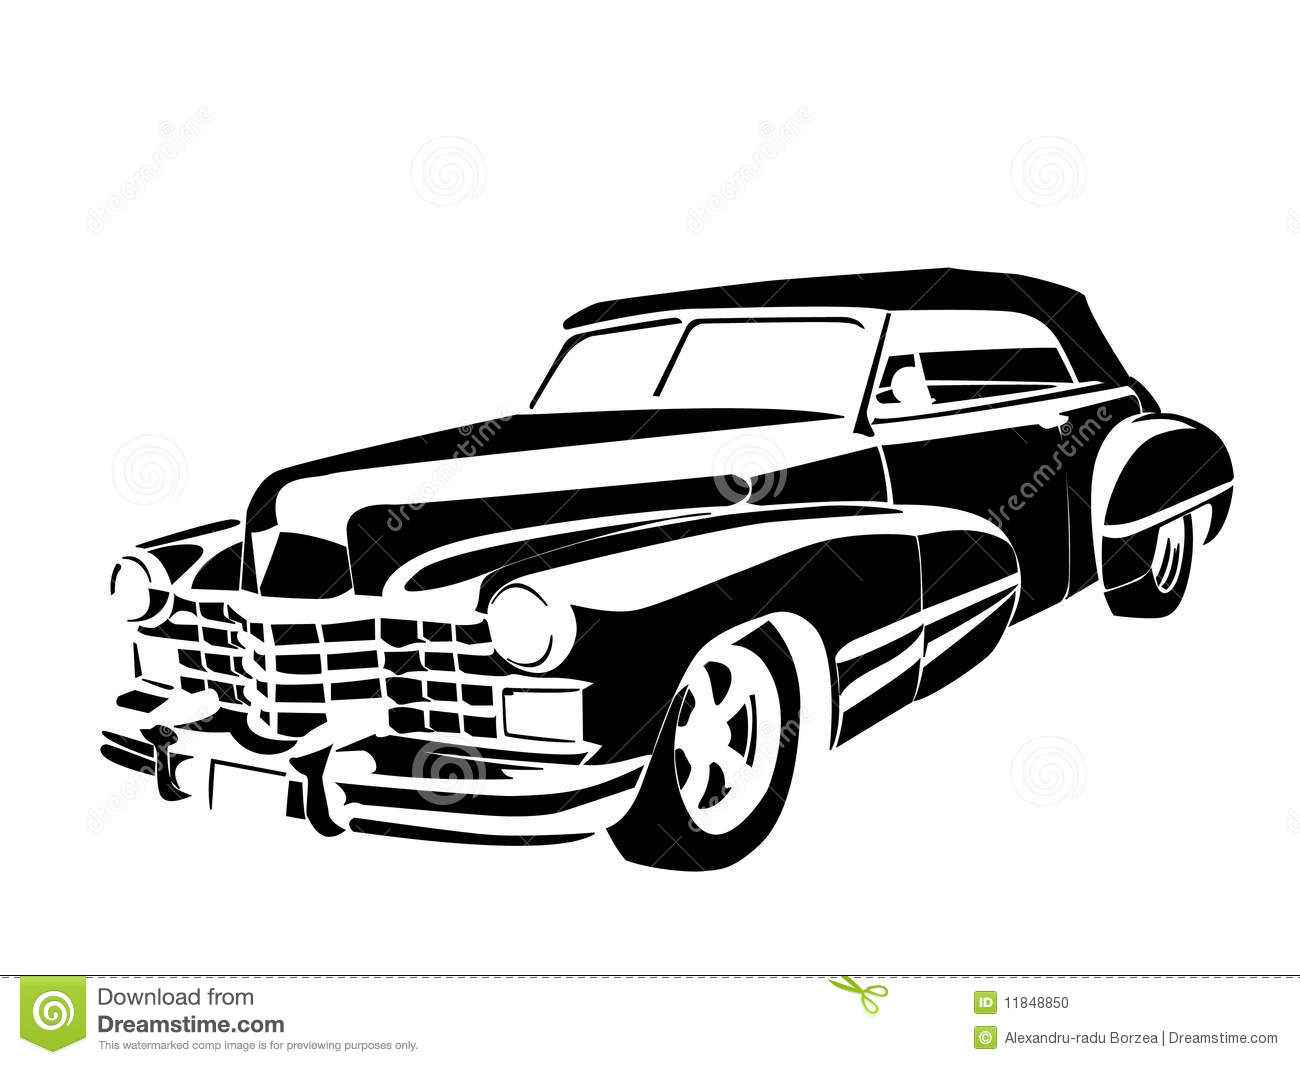 Old Classic Vintage Car Drown In Black On White